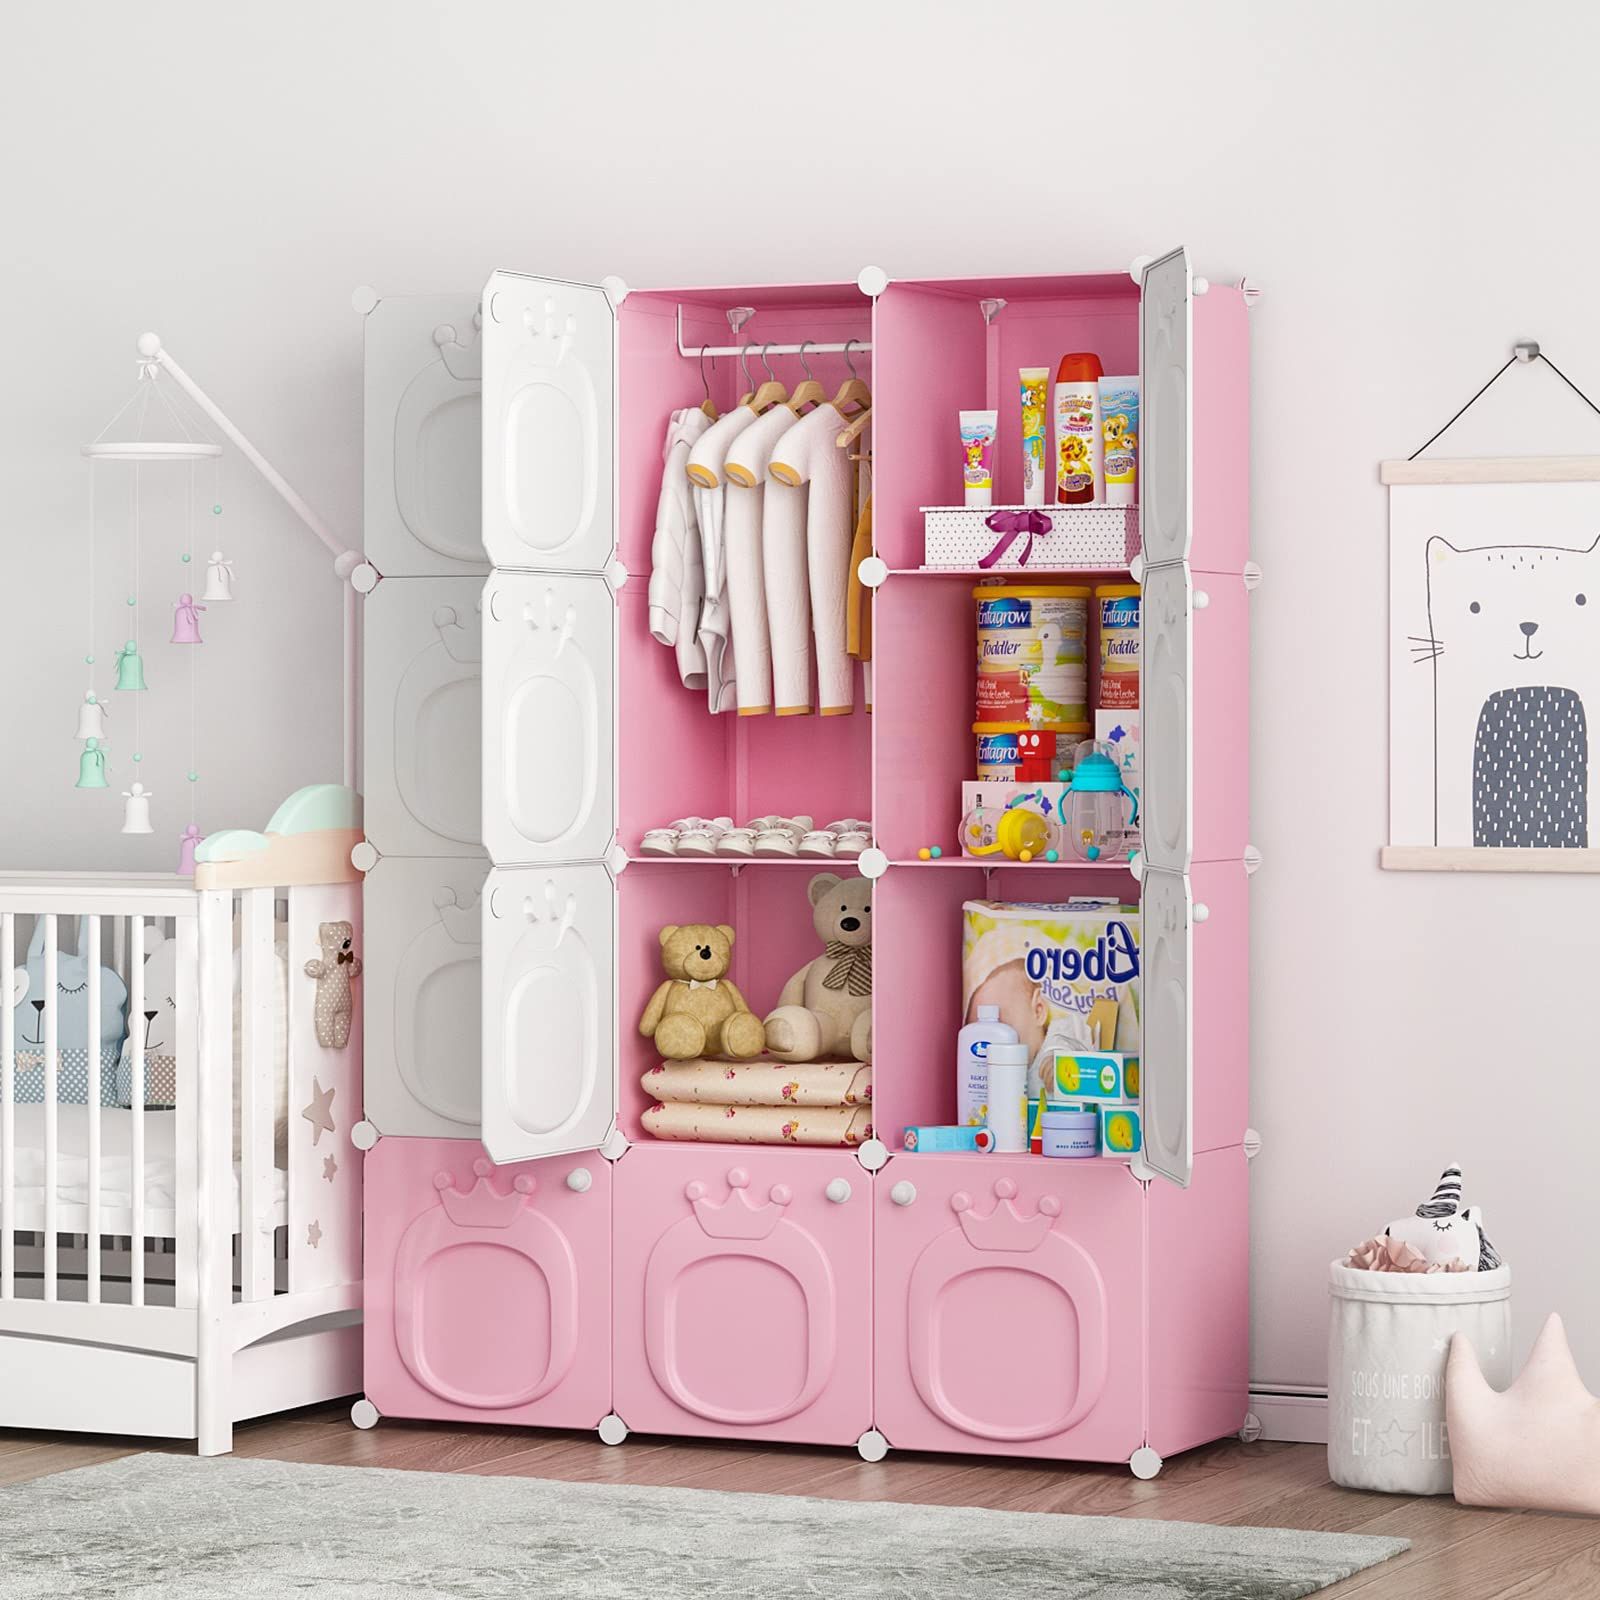 Preferred Baby Clothes Wardrobes For Amazon: Maginels Kids Closet Baby Wardrobe Dresser For Kids Bedroom  Nursery Armoire Clothes Hanging Closet With Doors, Pink, 12 Cubes : Home &  Kitchen (View 3 of 10)